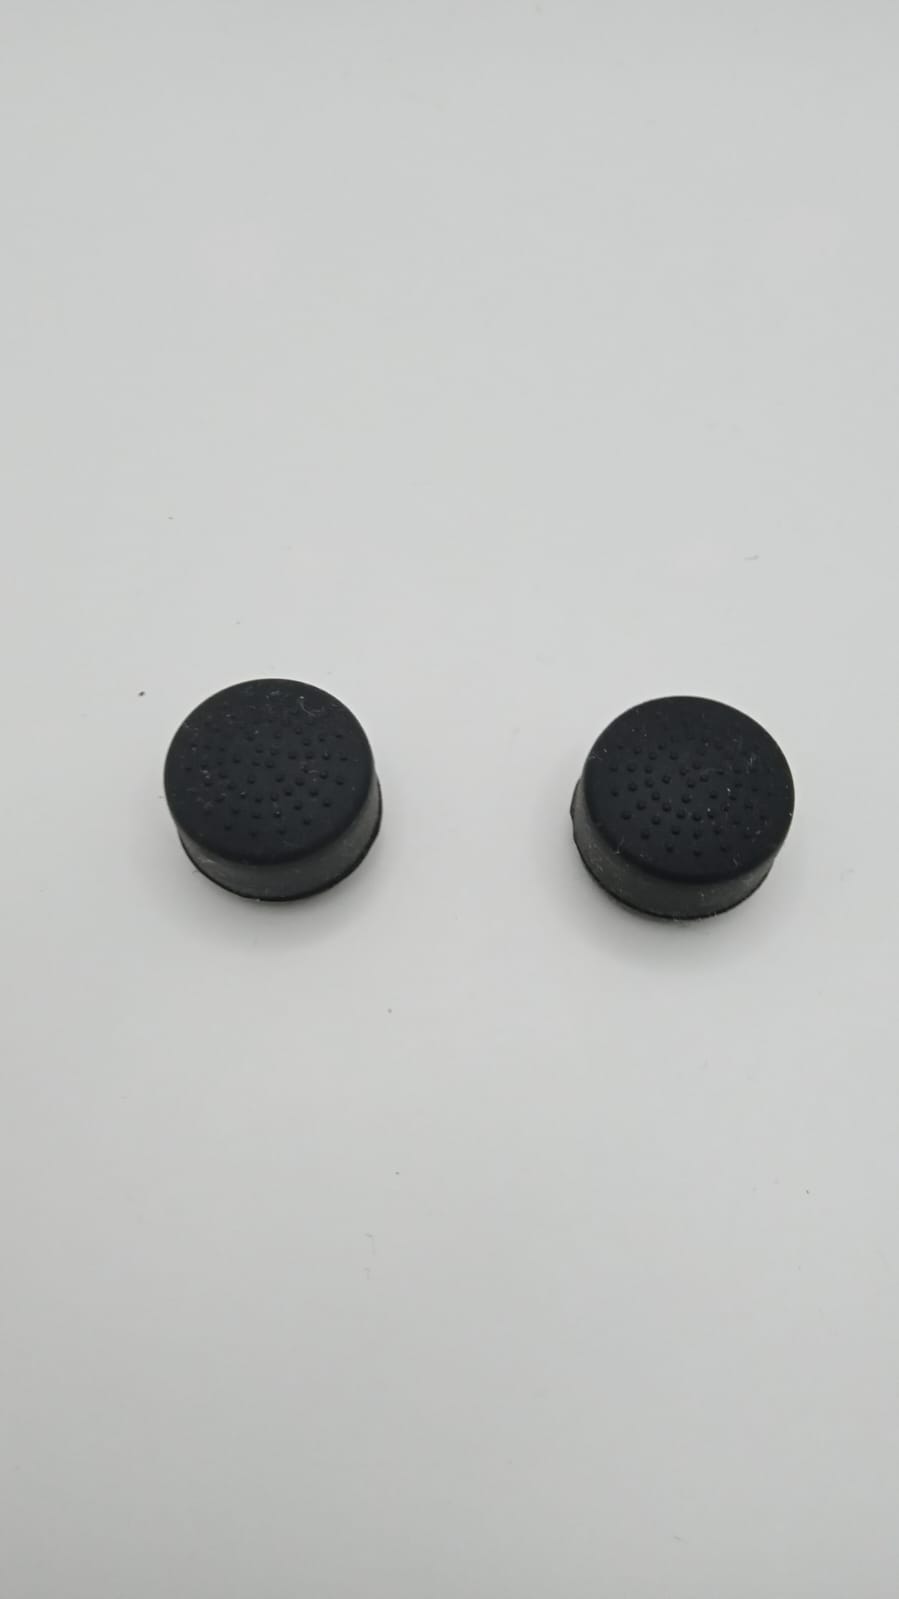 2 x Thumb Grips- XBOX One / XBOX 360 / PS4 / PS3 - 003